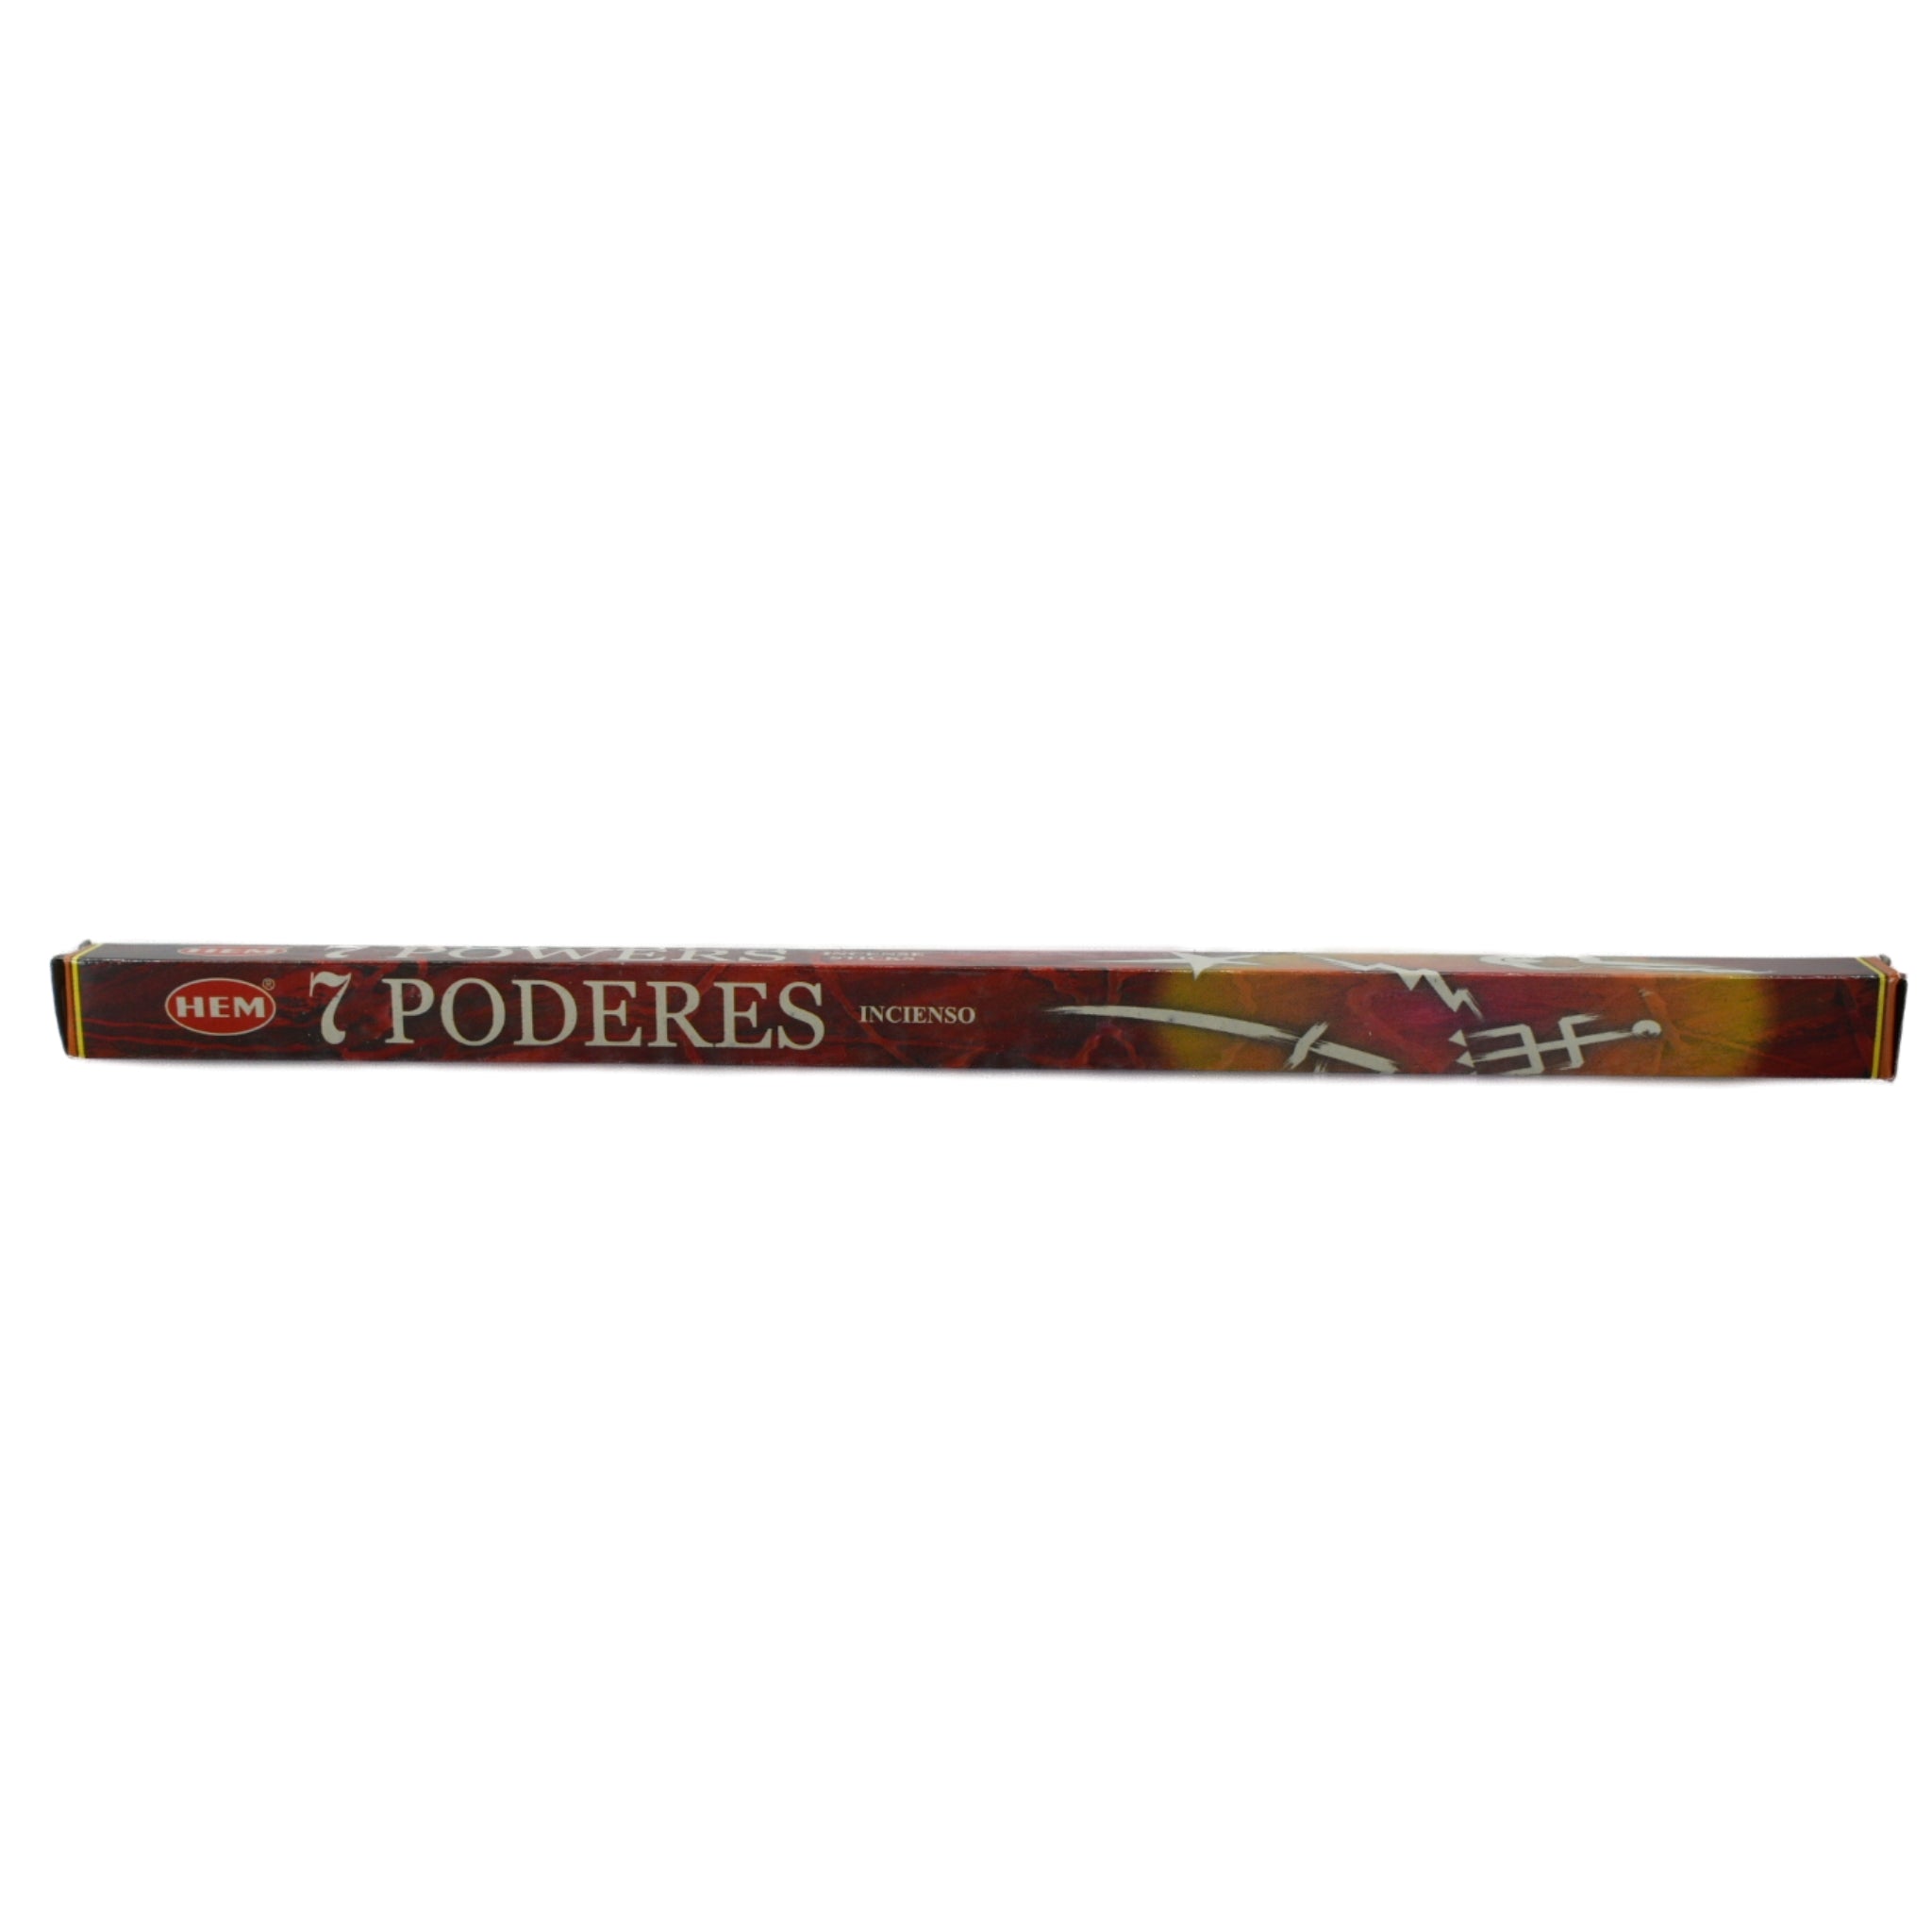 7 Powers Incense Sticks.  Contains 8 incense sticks each 9" long that burns for 30 minutes. Hand rolled made in India.  Brown package. Helps with perception, free will, setting intentions.  